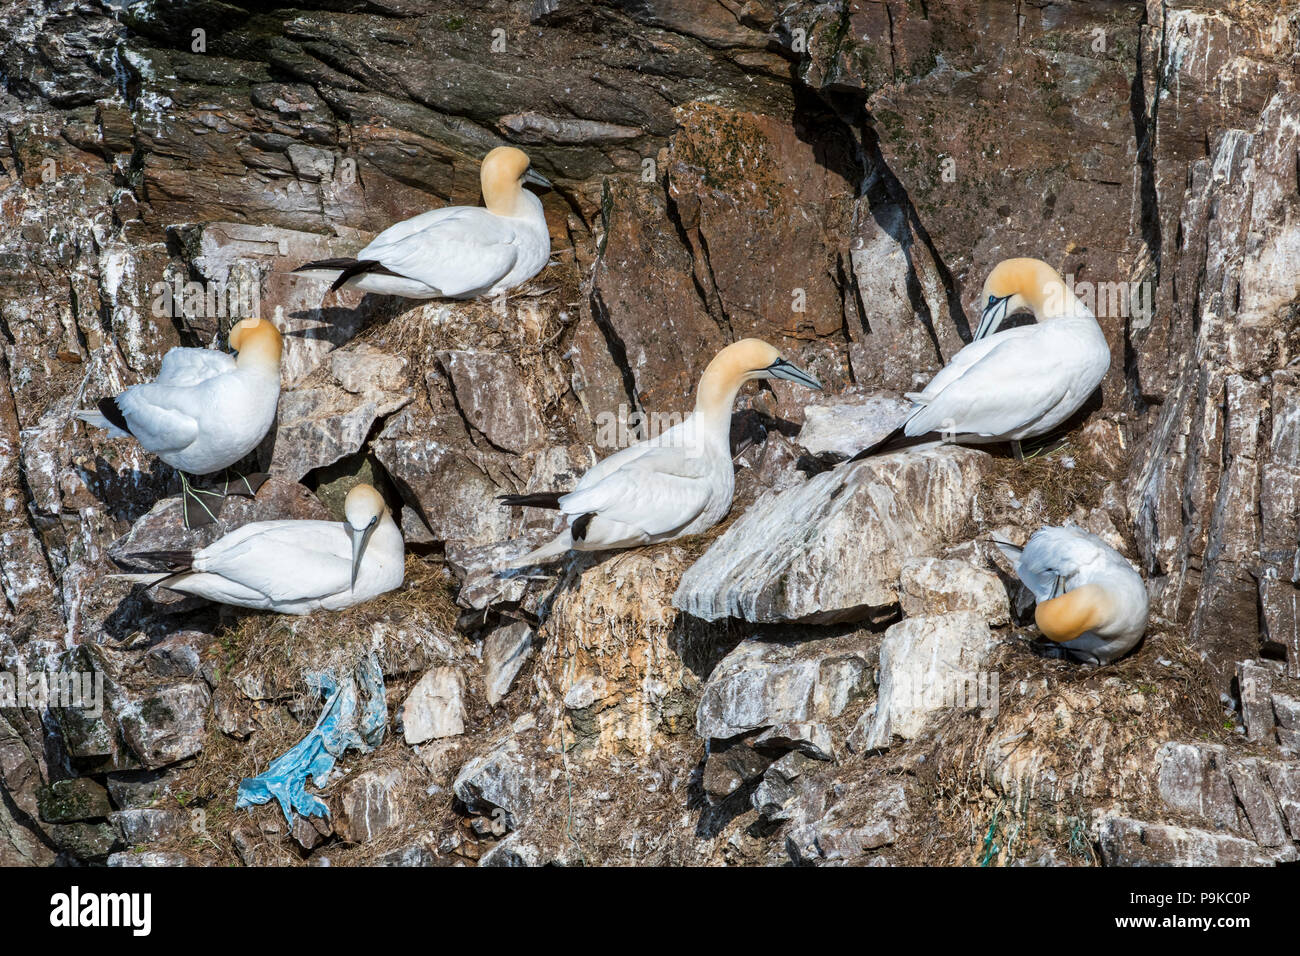 Northern gannets (Morus bassanus) breeding on nests partly made of discarded plastic waste in sea cliff at seabird colony in spring Stock Photo